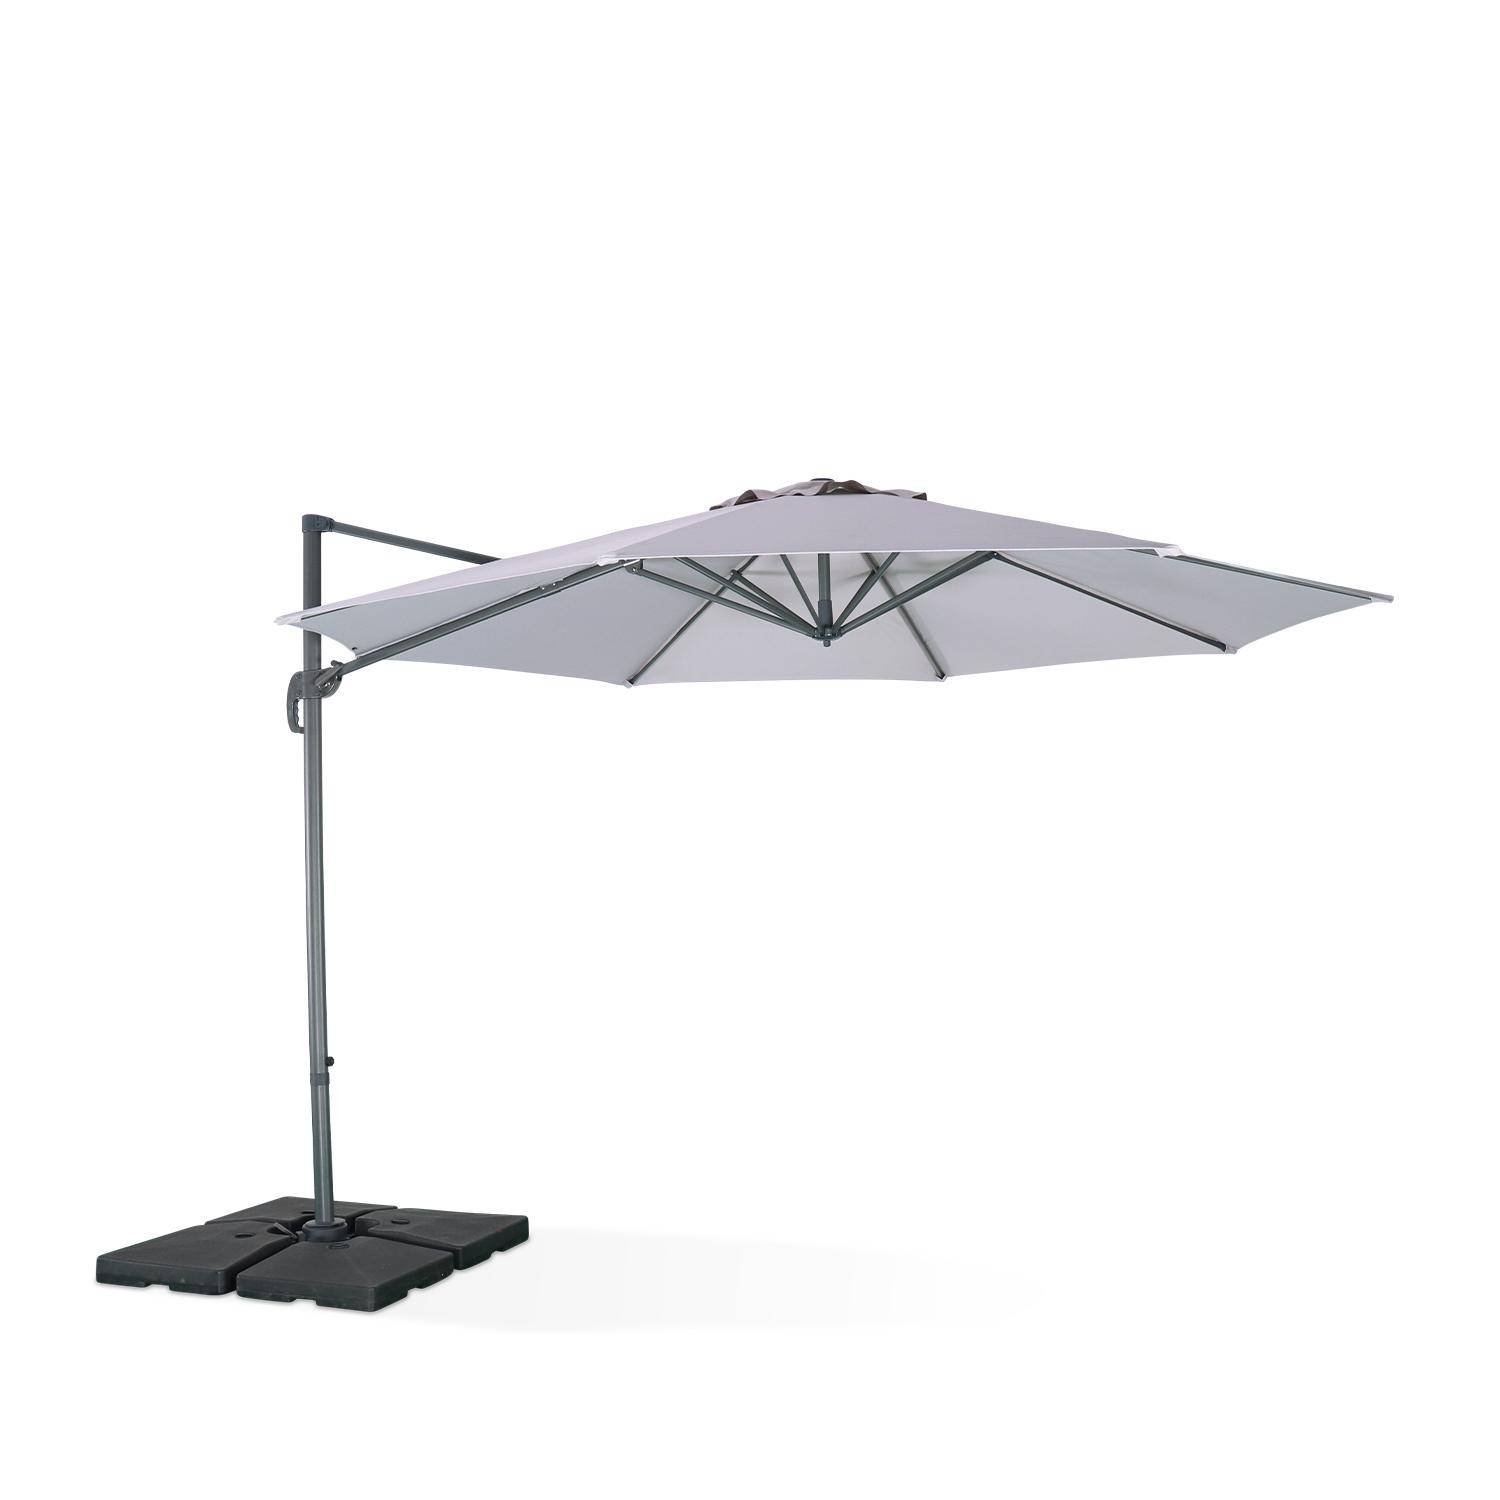 Parasol Ø350cm - parasol that can be tilted, folded and 360° rotation - Antibes - Light grey Photo1